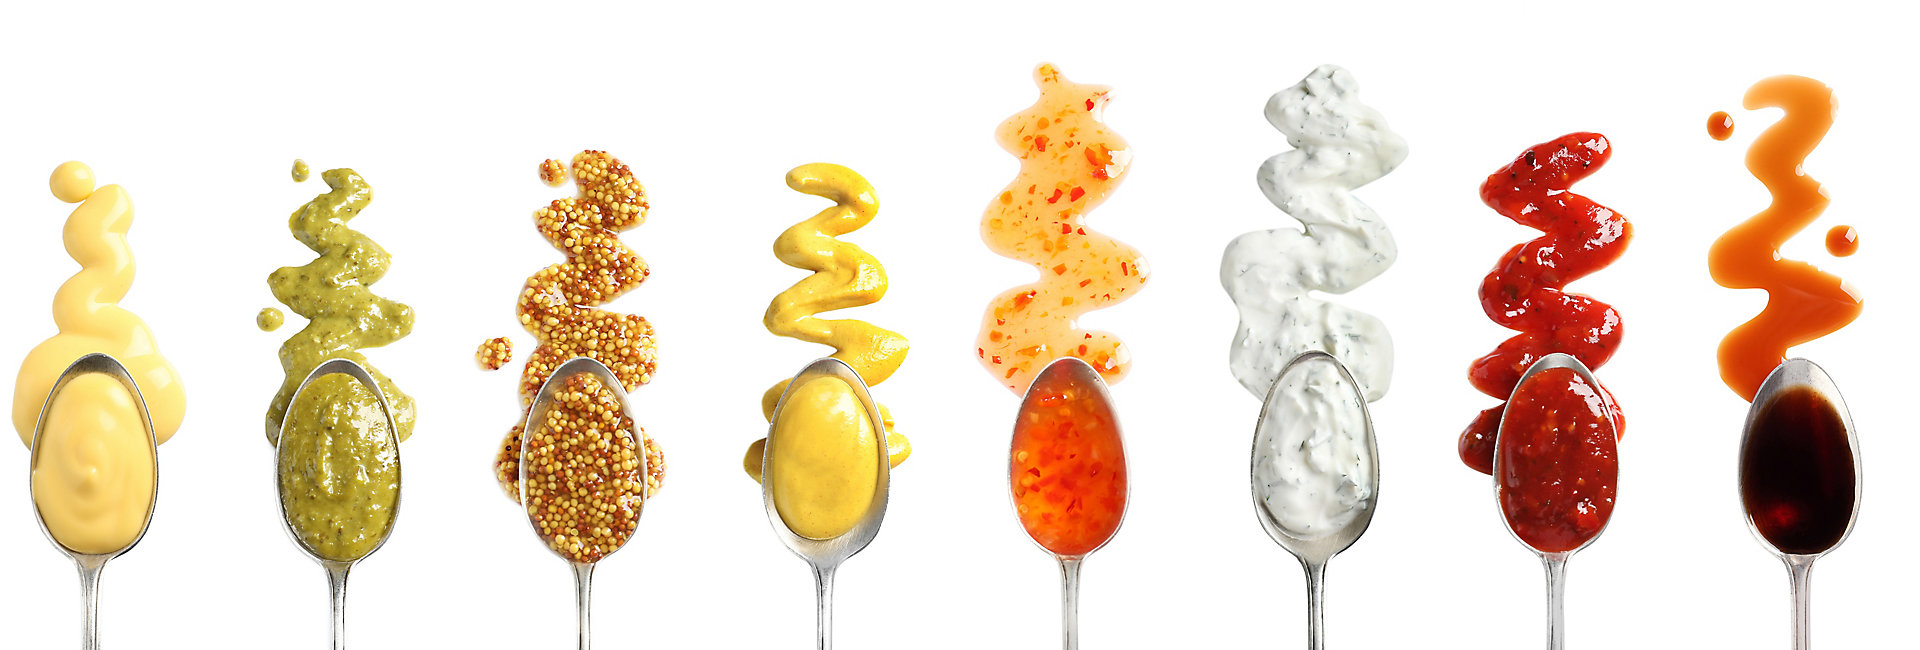 Set of spoons with different delicious sauces on white background, top view; Shutterstock ID 1446769997; purchase_order: KFT; job: Asian; client: Marketing